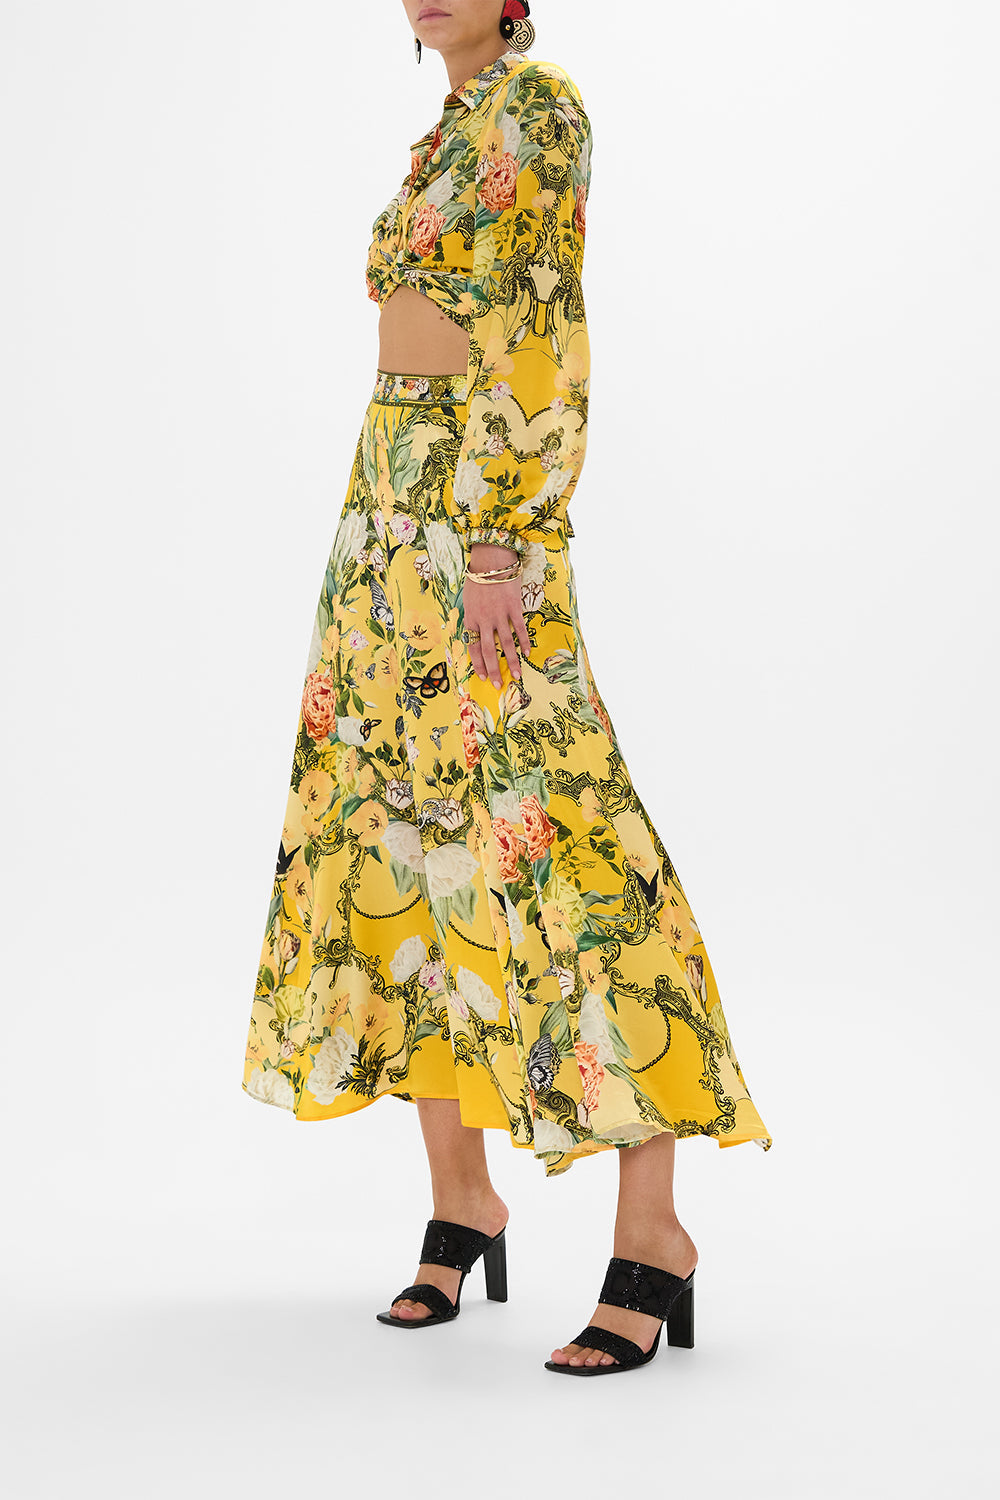 CAMILLA yellow floral panel flared maxi skirt in Paths Of Gold print